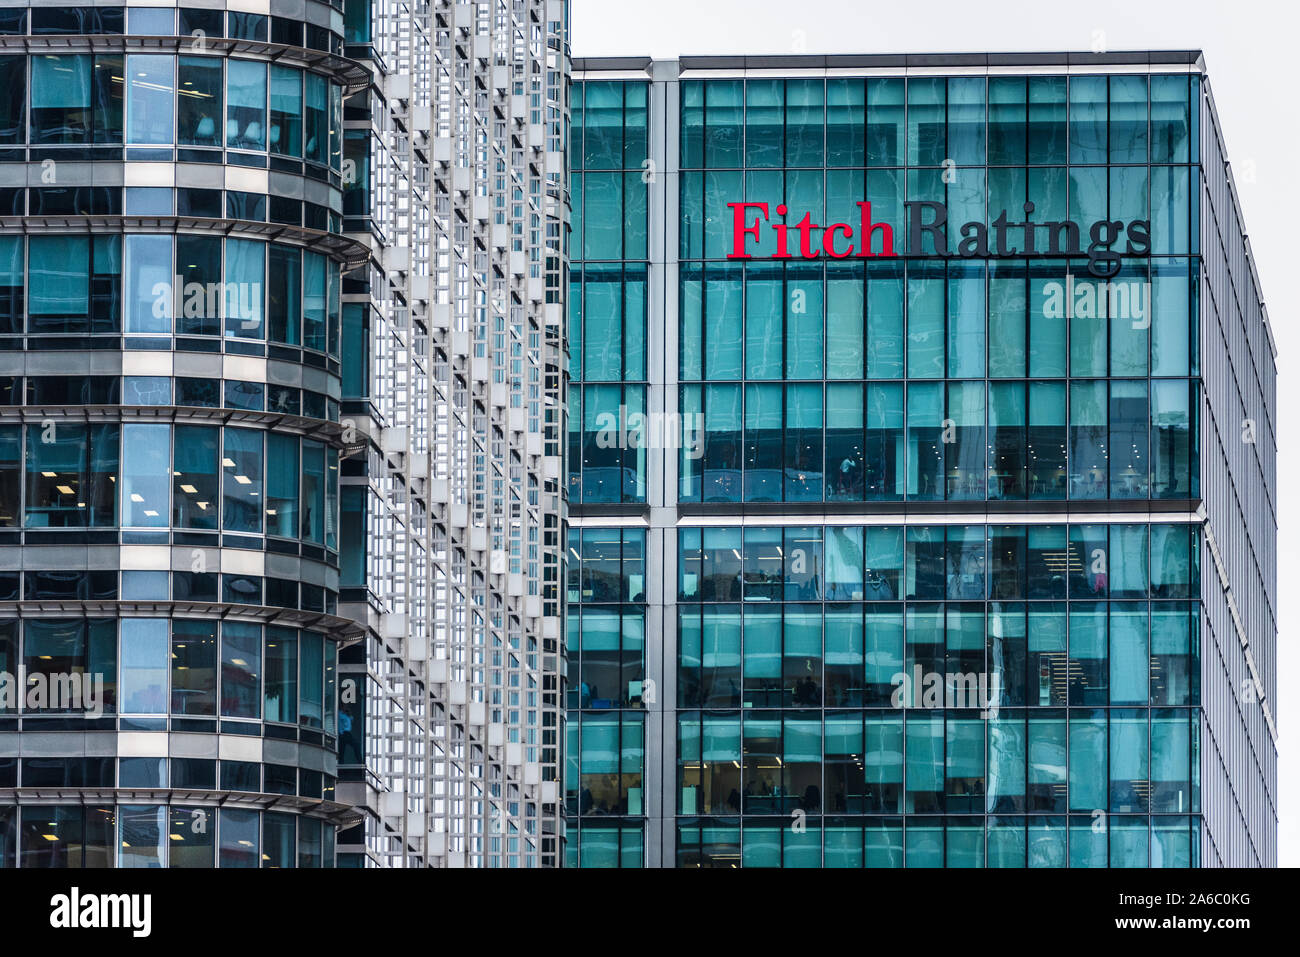 Fitch Ratings HQ - Fitch Ratings Global HQ London - the Fitch Ratings tower in Canary Wharf London Stock Photo